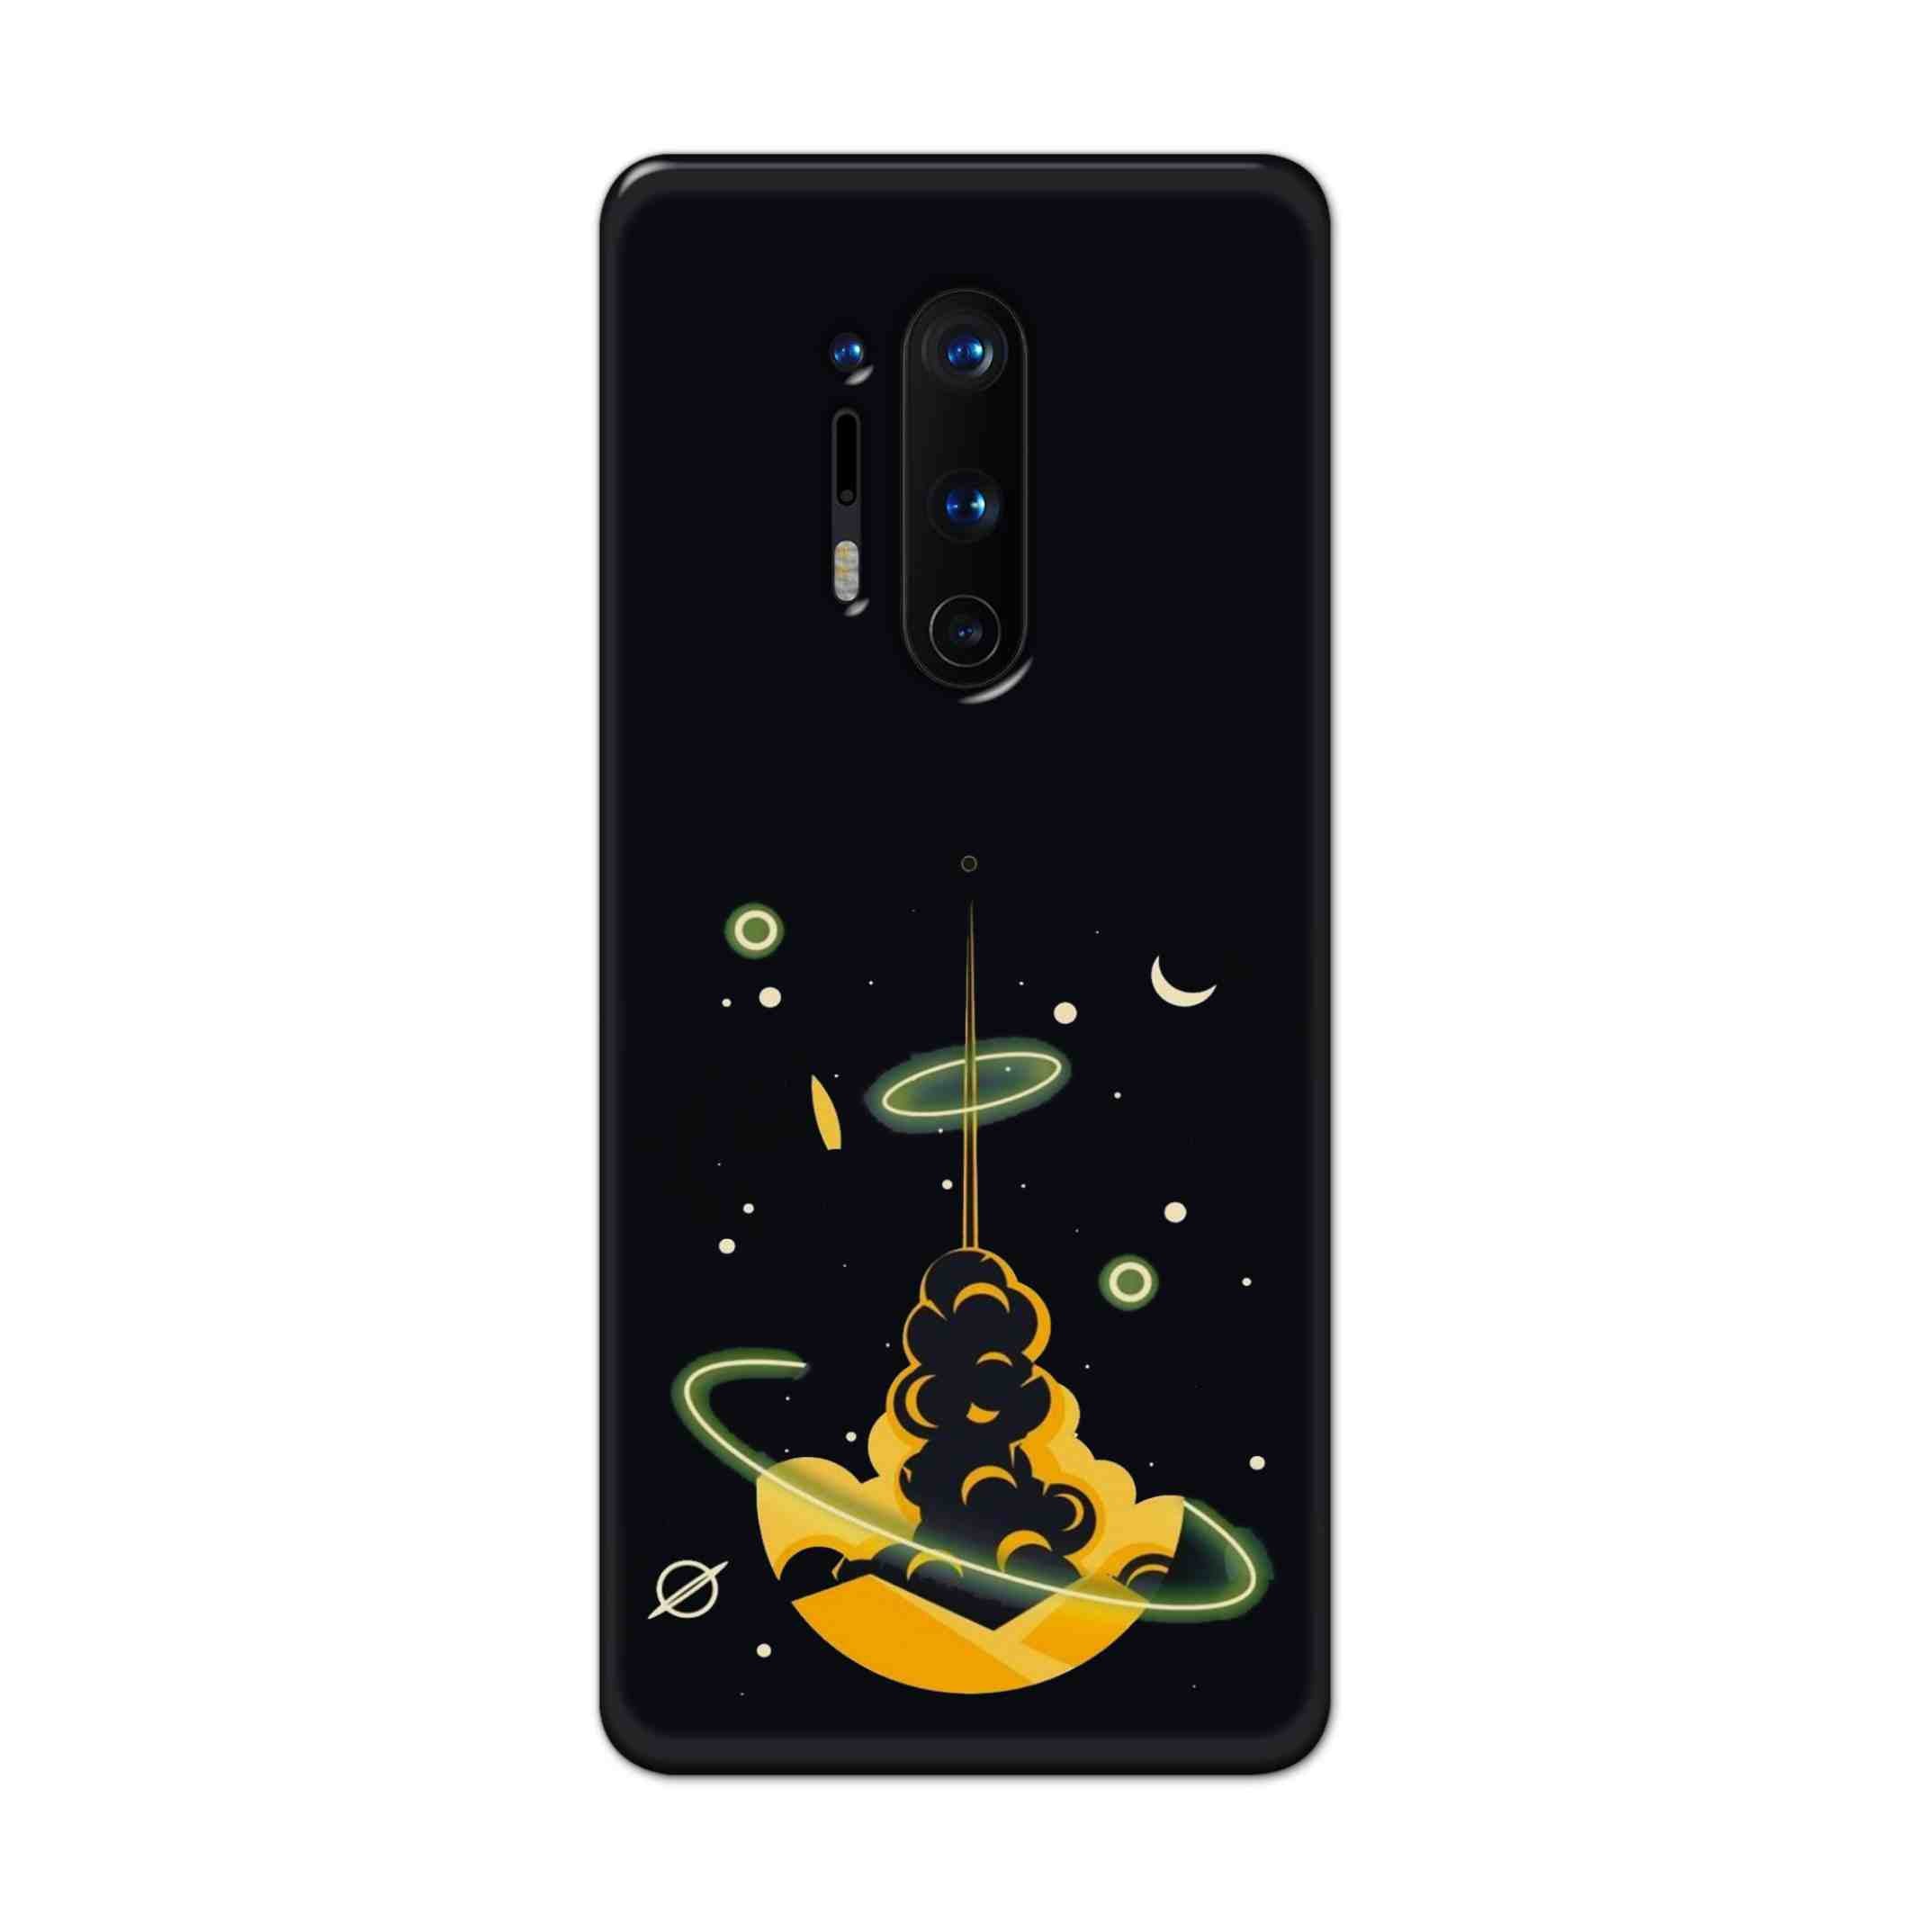 Buy Moon Hard Back Mobile Phone Case Cover For OnePlus 8 Pro Online